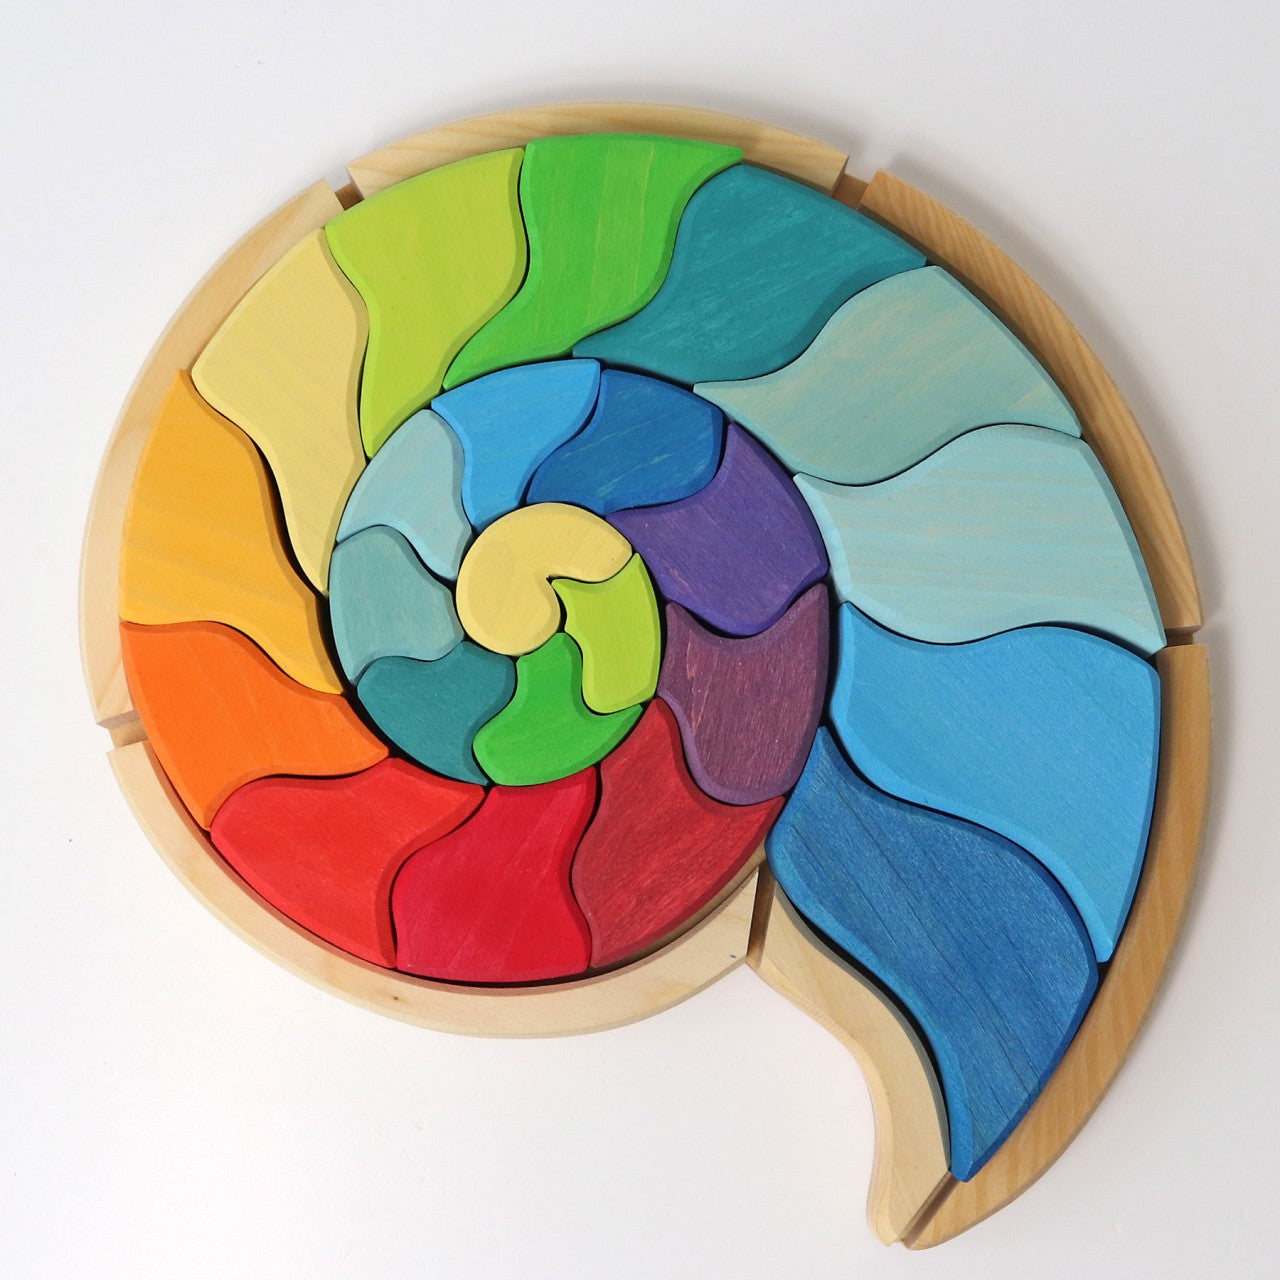 Ammonite | Wooden Puzzle & Building Set | Wooden Toys for Kids | Open-Ended Play